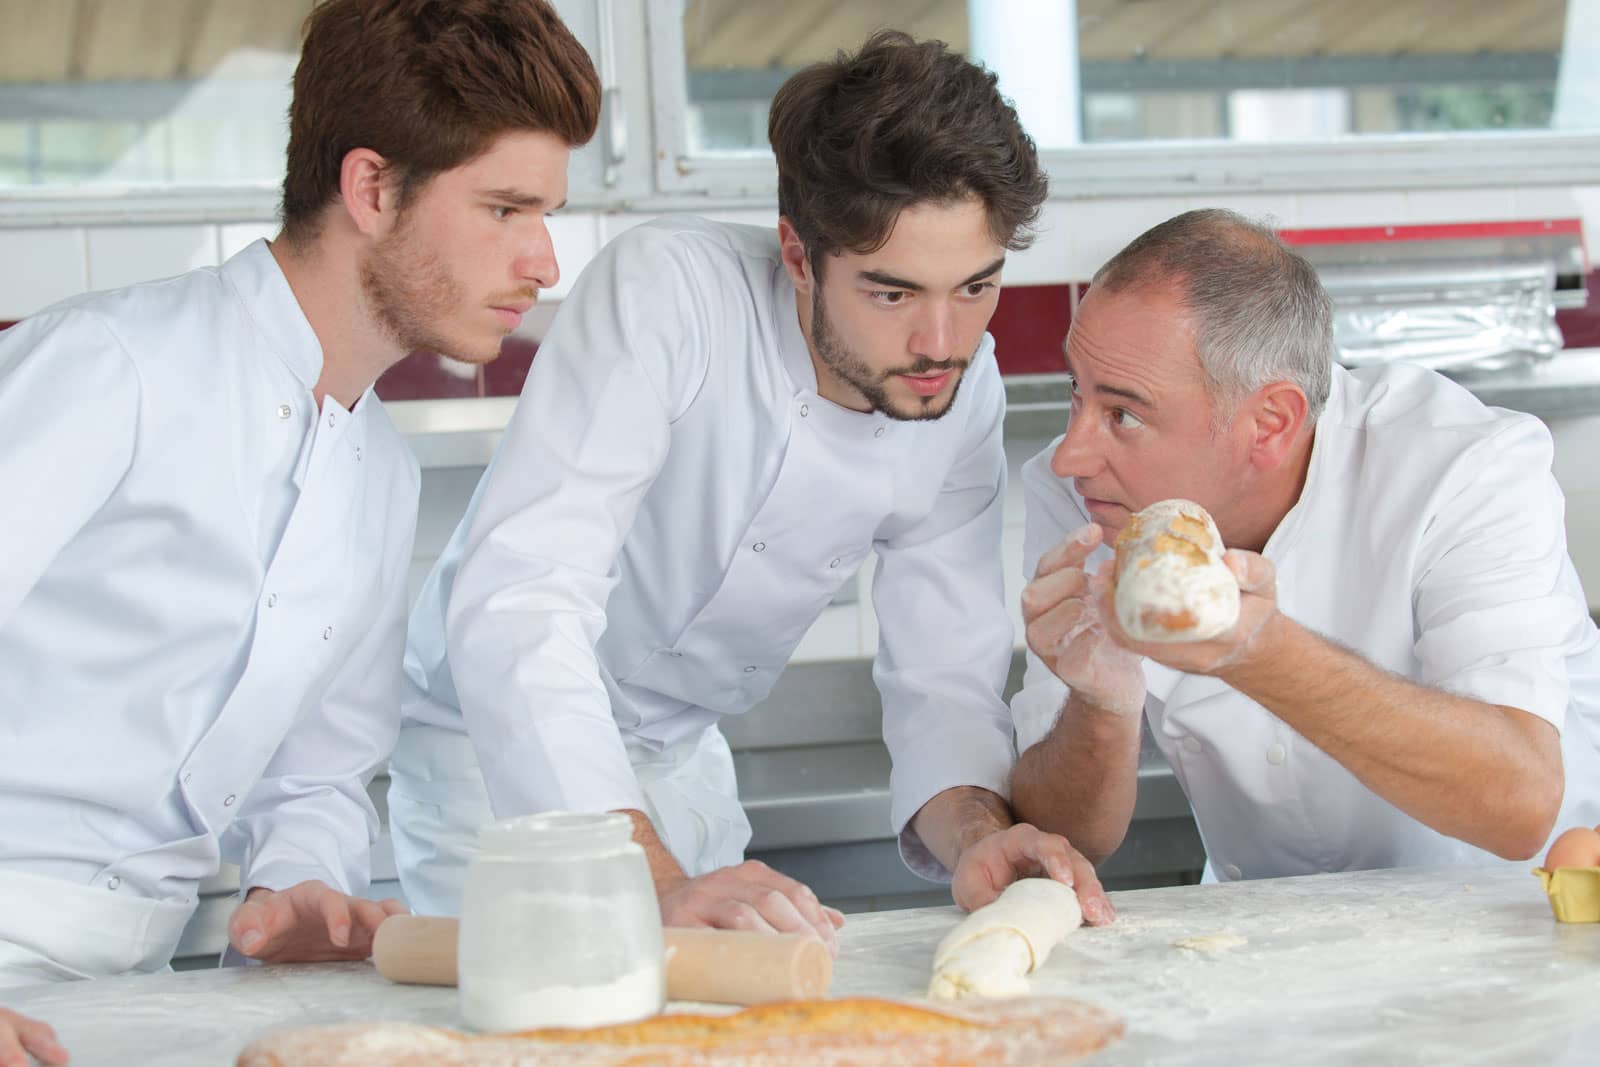 A senior chef holding bread up as two younger chefs examine the composition